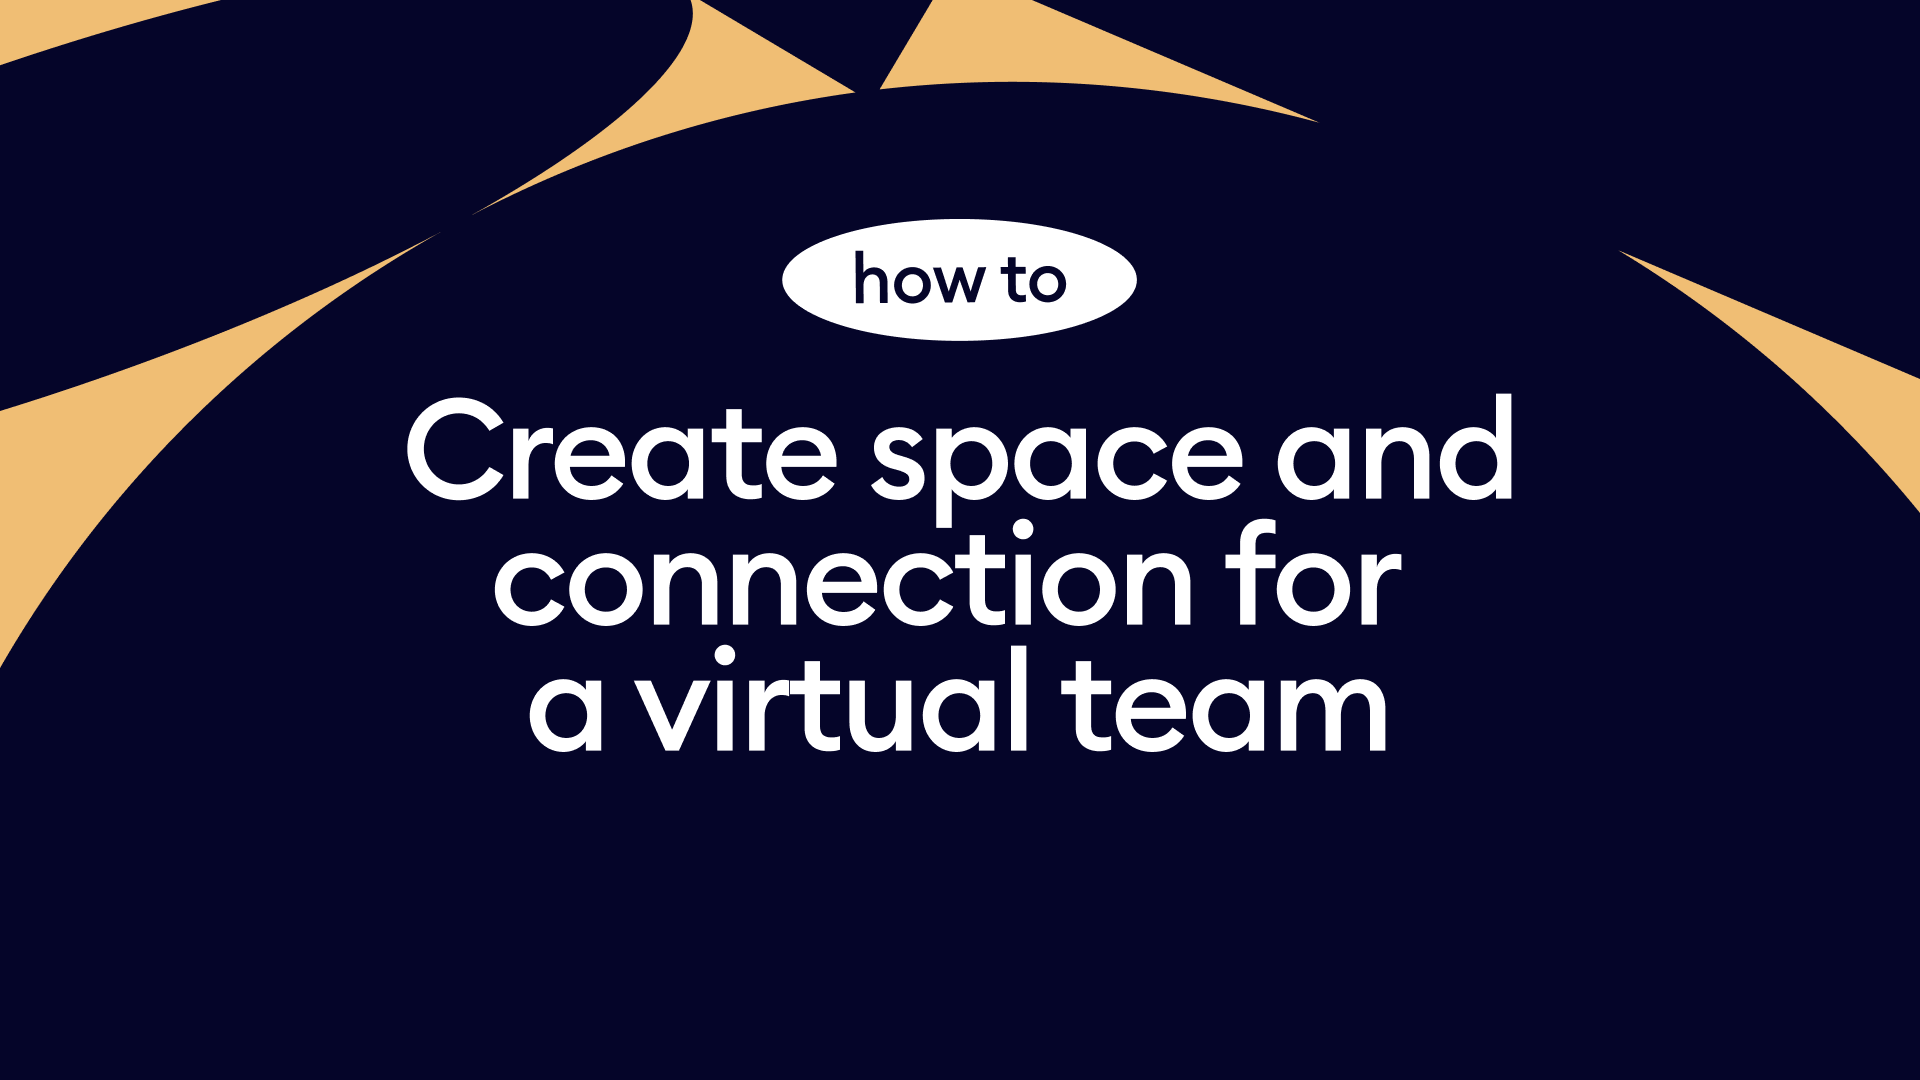 How to create space and connection for a virtual team